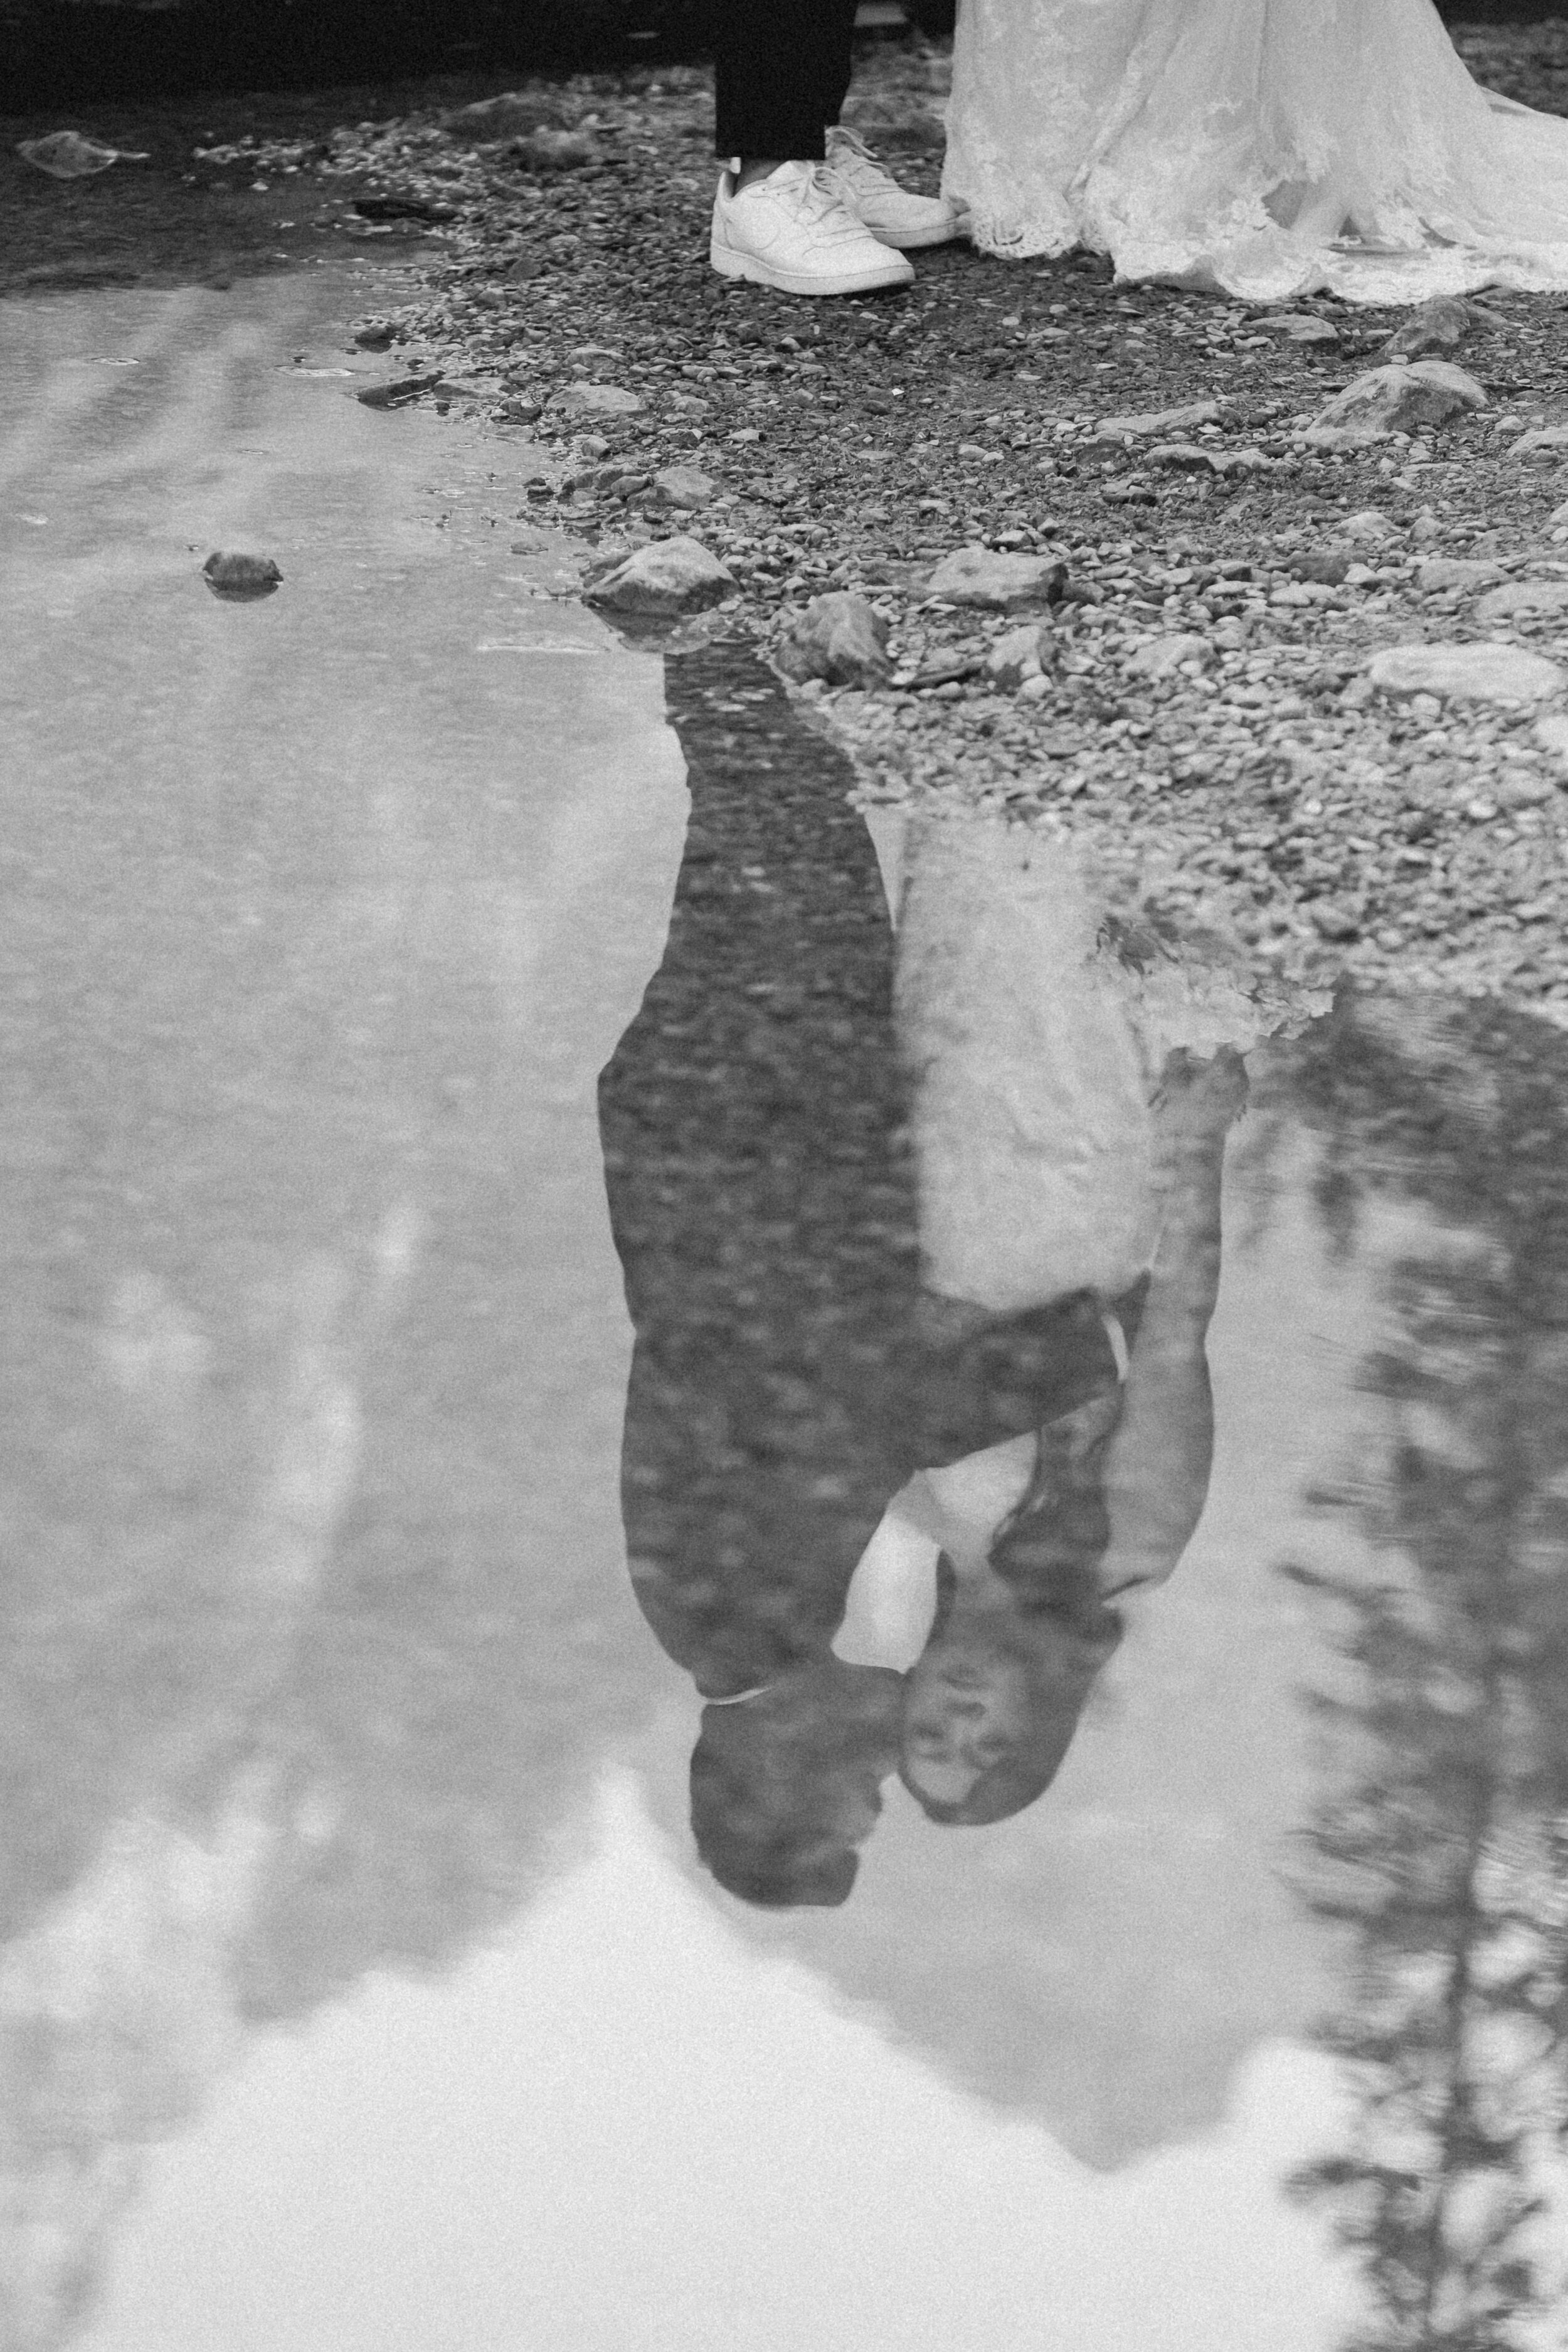 A couple's reflection is shown in an alpine lake's reflection.